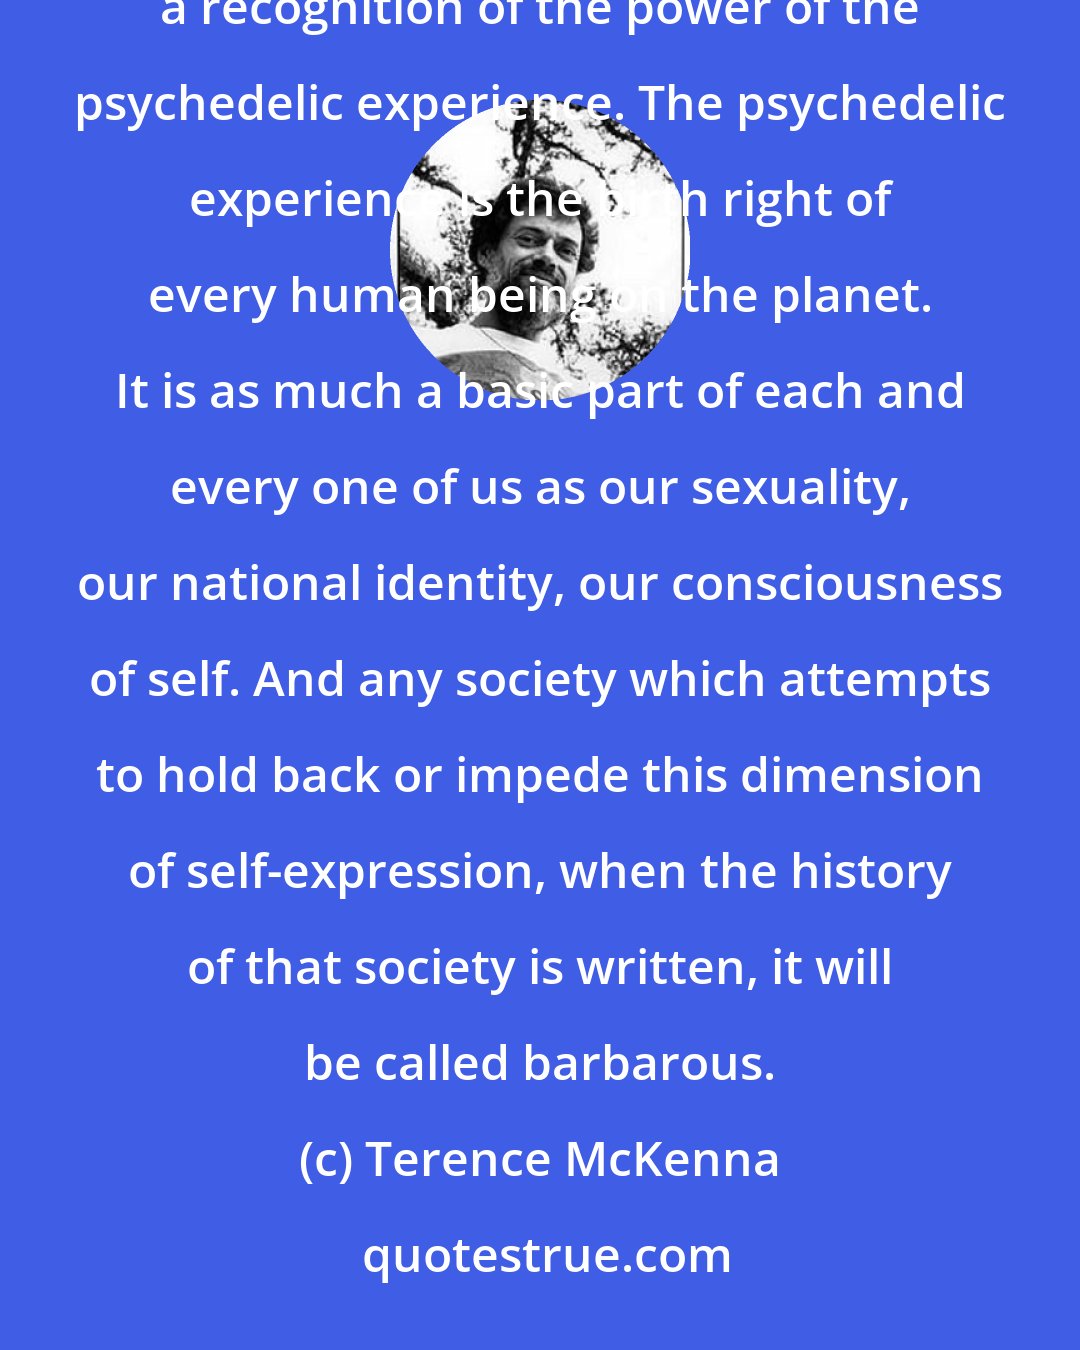 Terence McKenna: We have the tools, the intellect, the will to create a caring global culture. It isn't going to come without a recognition of the power of the psychedelic experience. The psychedelic experience is the birth right of every human being on the planet. It is as much a basic part of each and every one of us as our sexuality, our national identity, our consciousness of self. And any society which attempts to hold back or impede this dimension of self-expression, when the history of that society is written, it will be called barbarous.